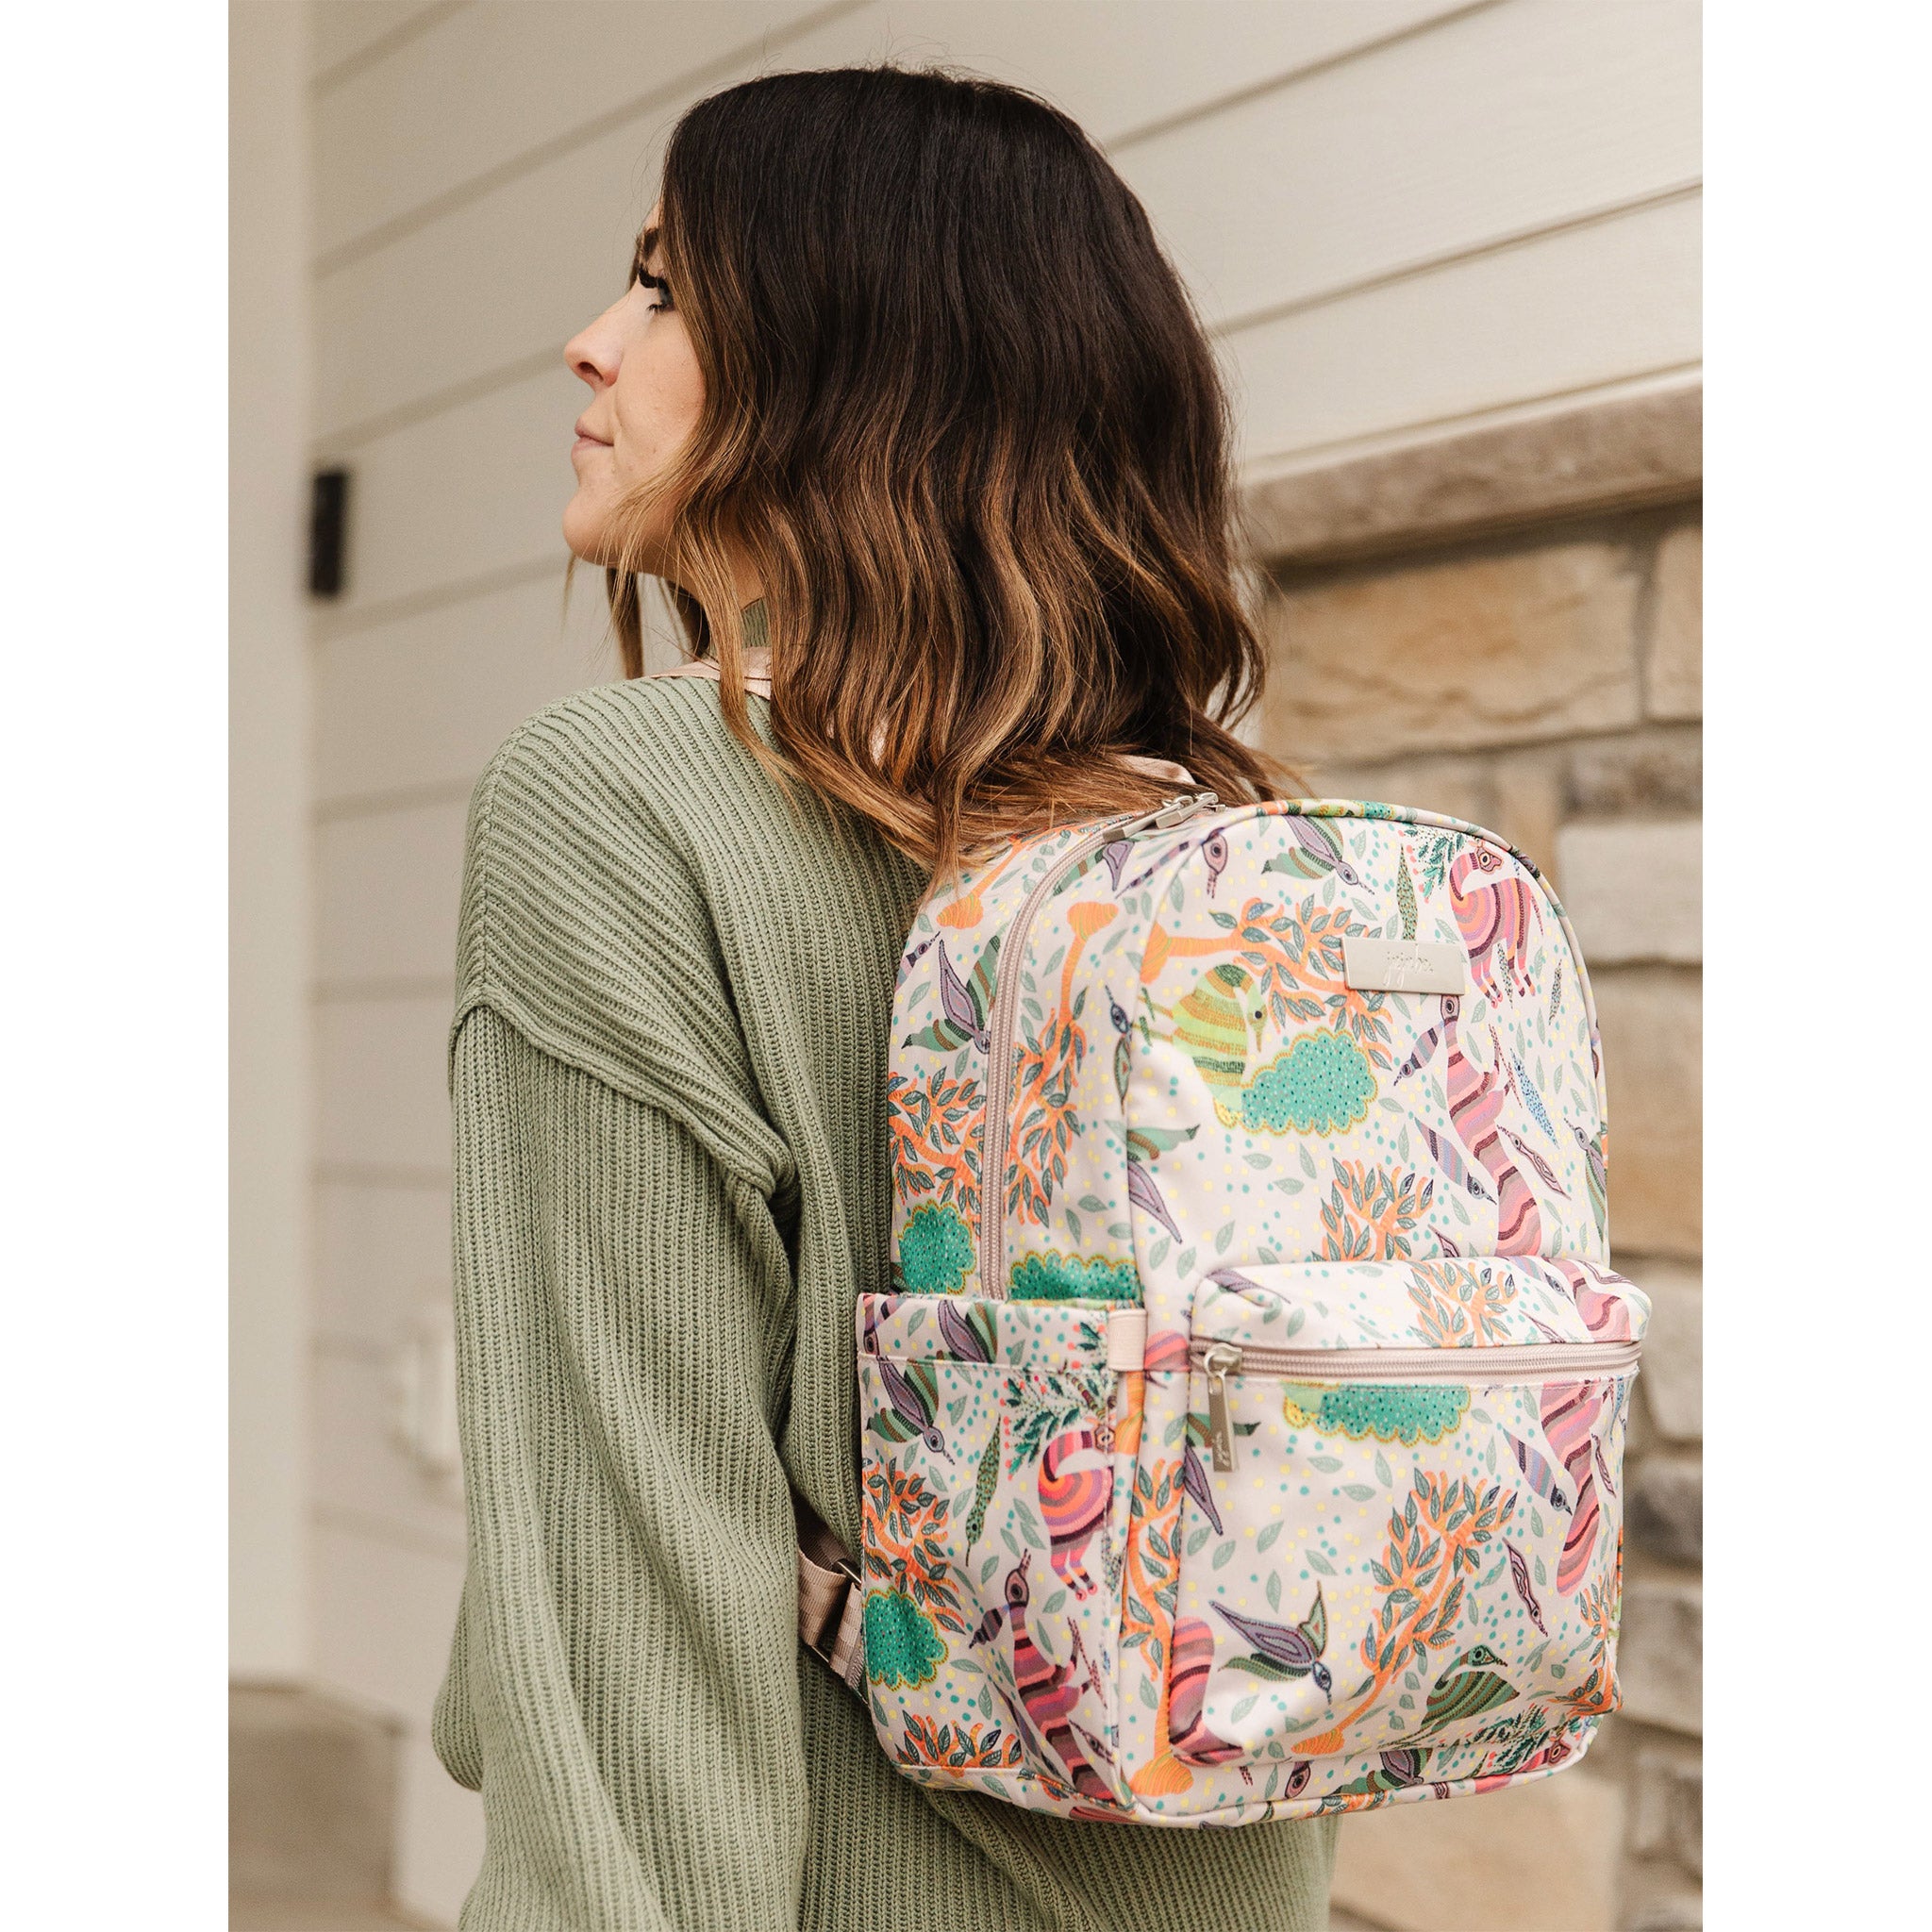 Multicolor Animals, Birds and Trees on a Taupe Background Midi Backpack worn by a Woman.